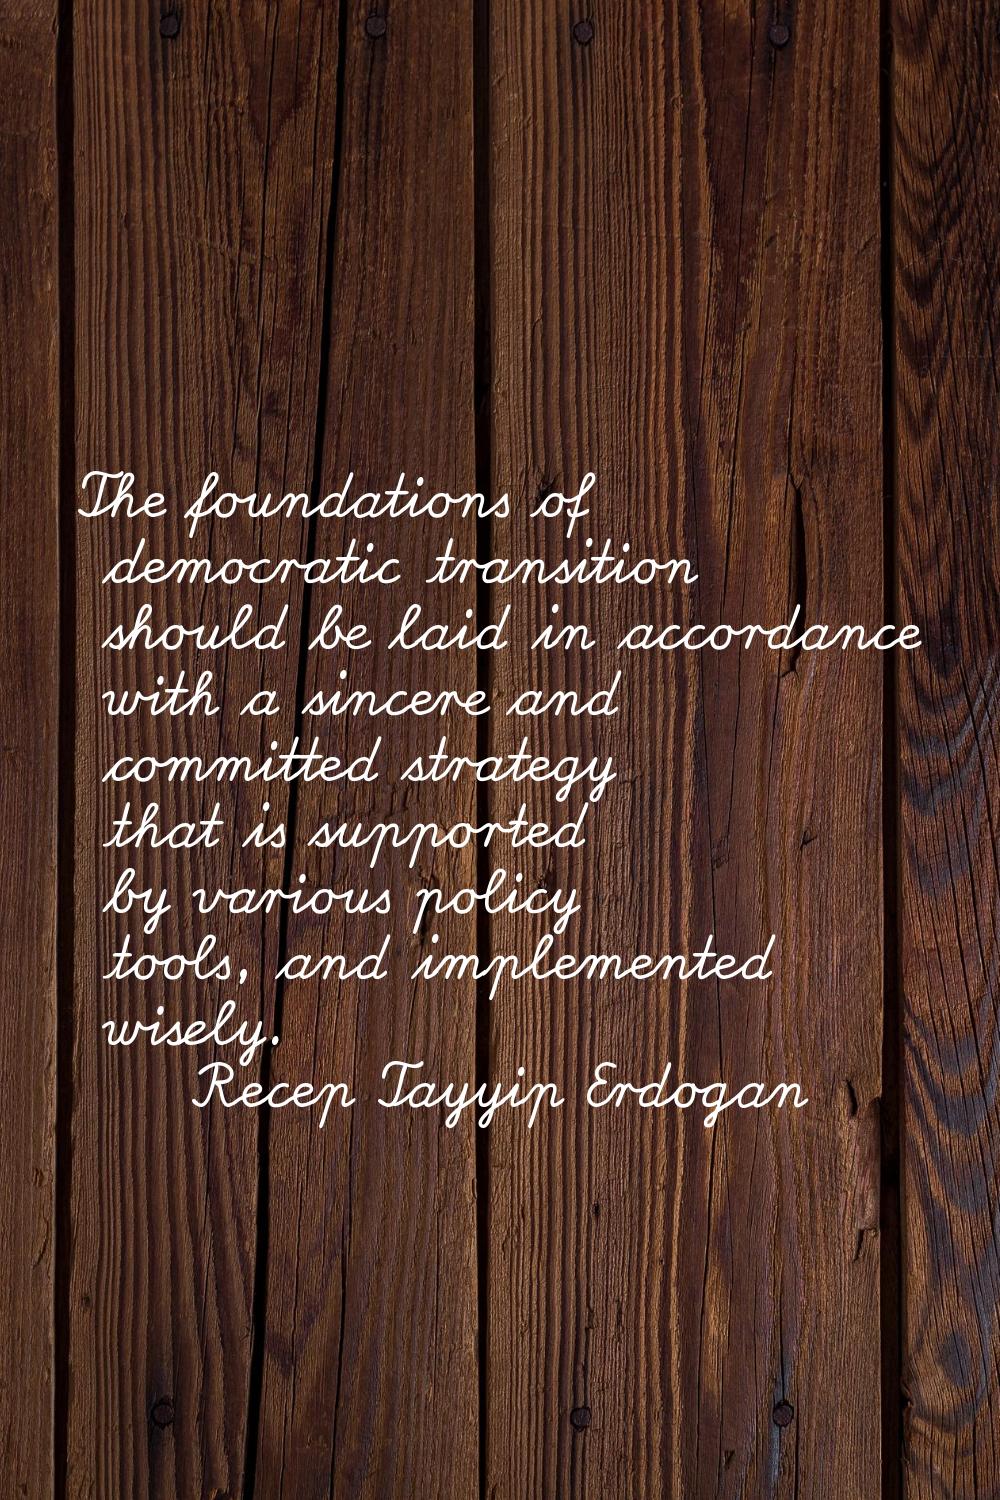 The foundations of democratic transition should be laid in accordance with a sincere and committed 